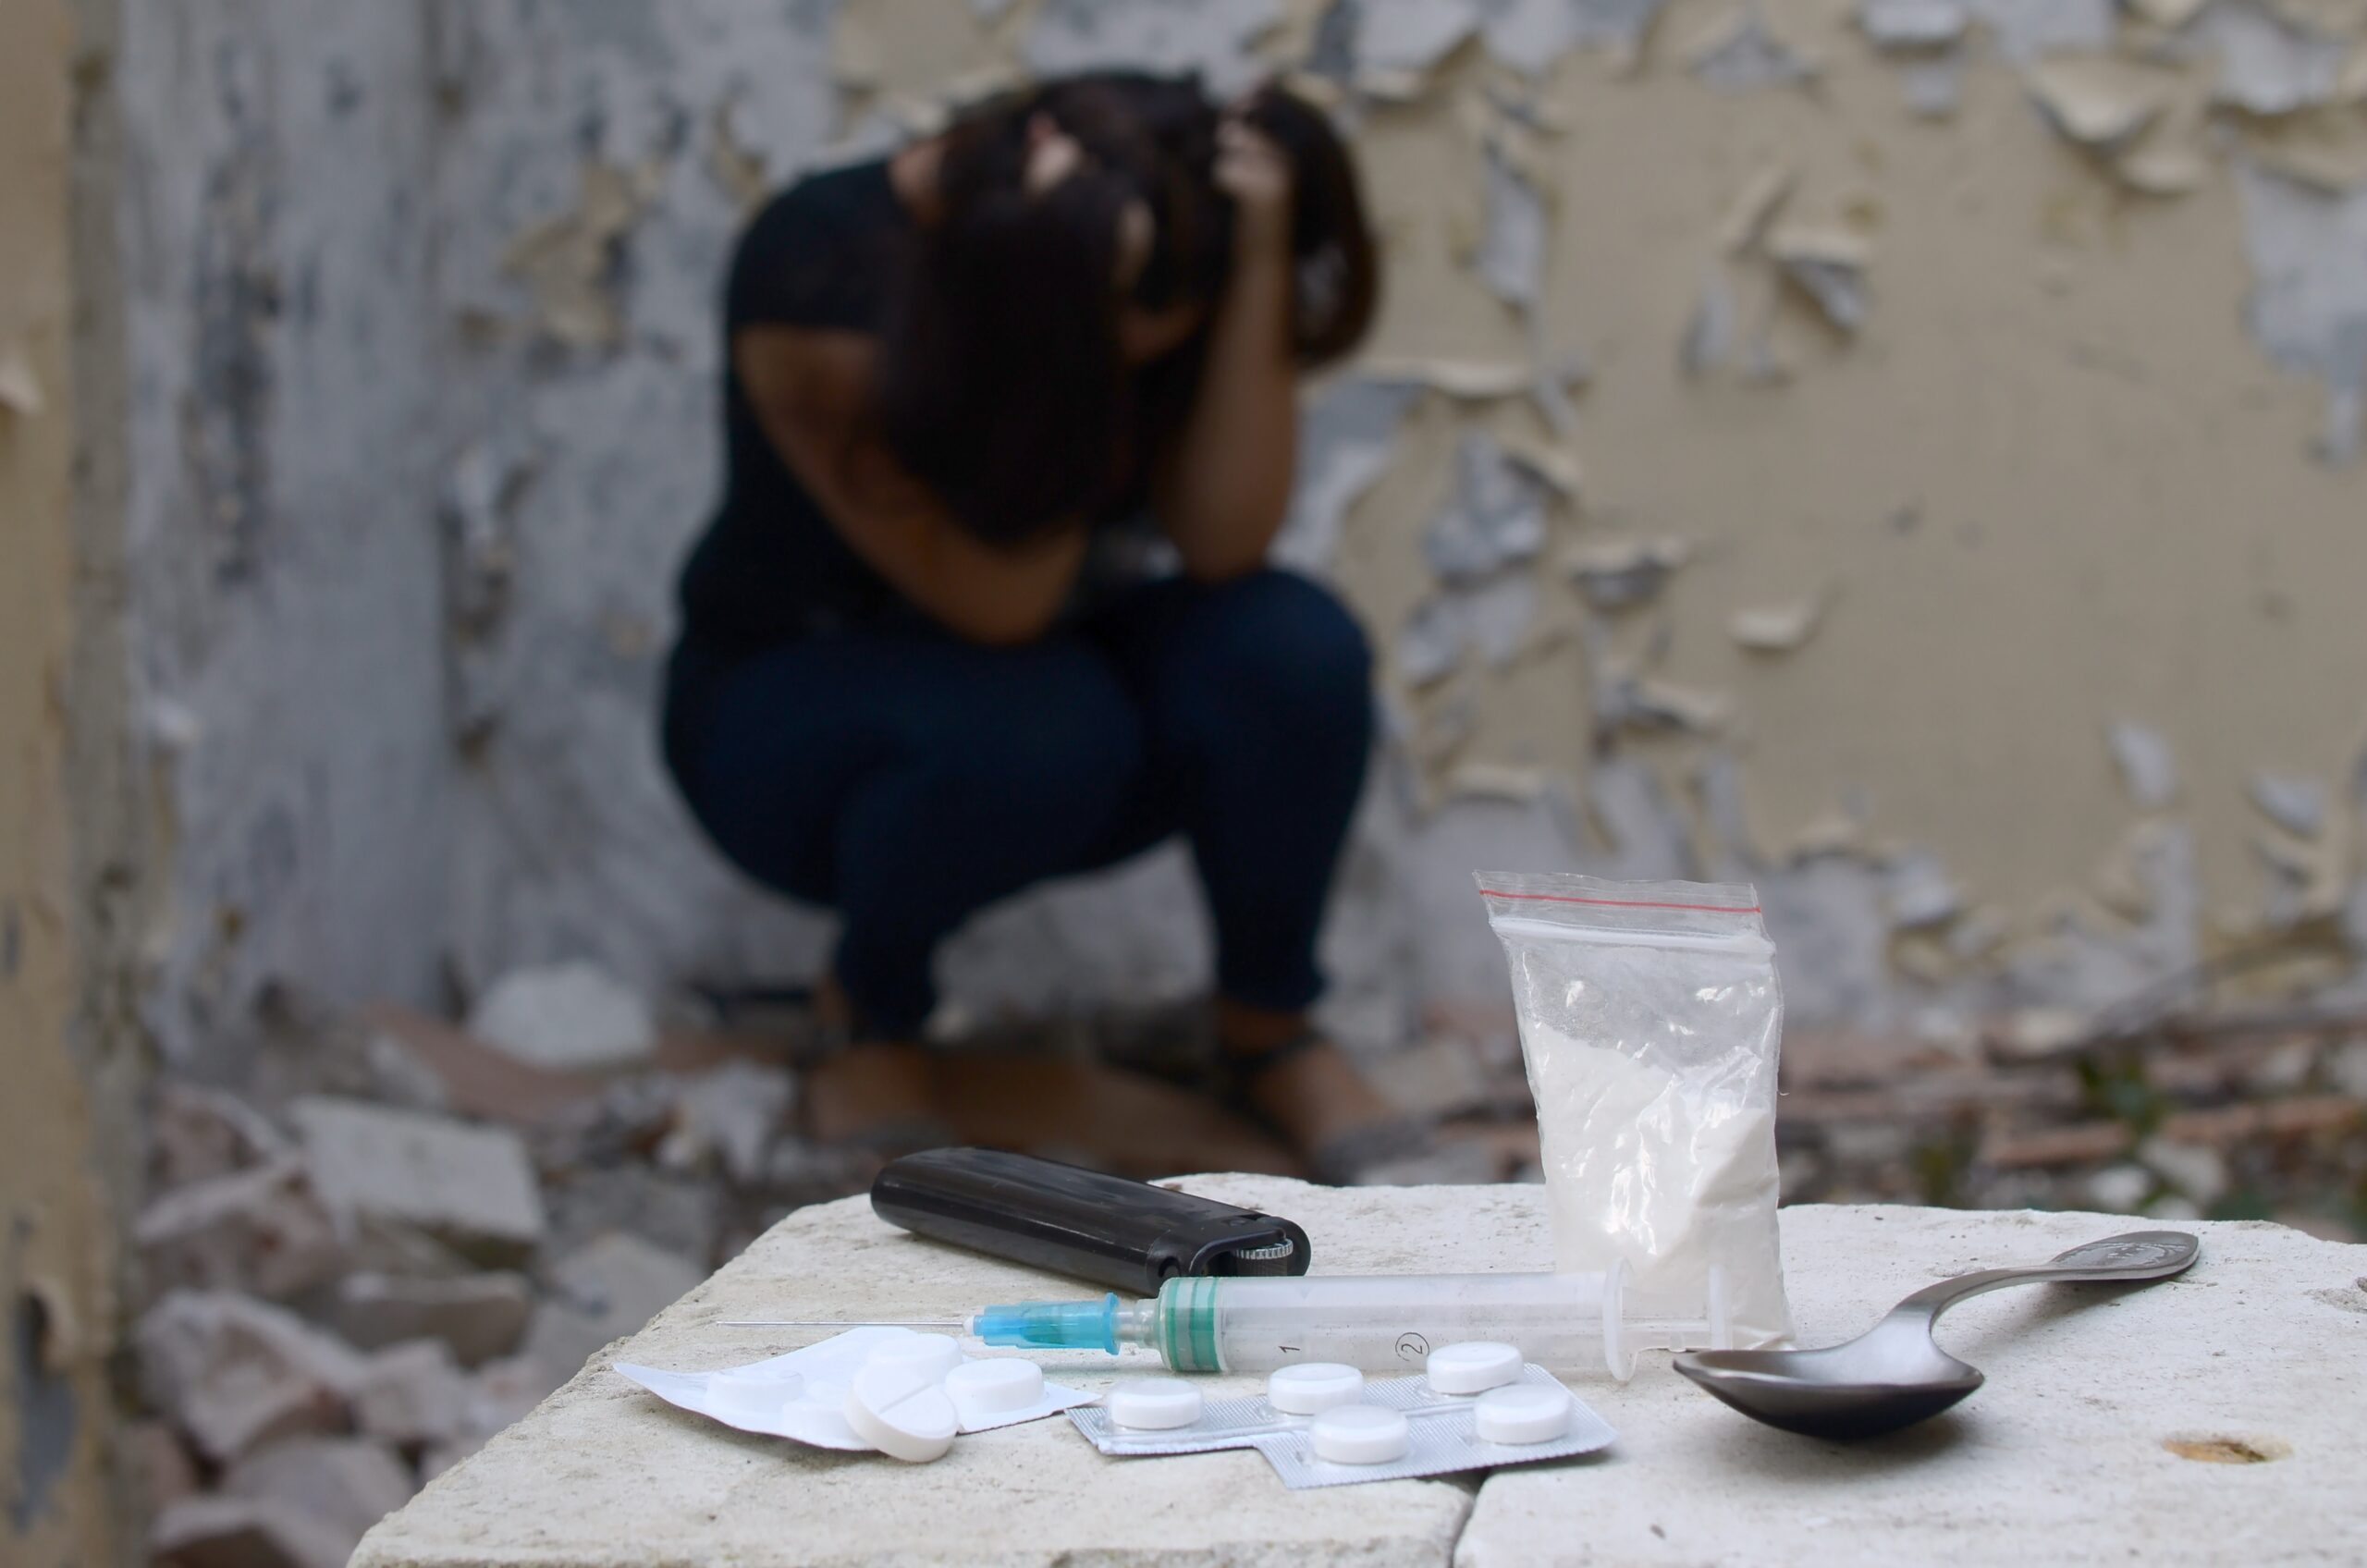 Young woman in despair suffers from narcotic effects next to packs of heroin and many drug tablets. Problems of drug addiction and illegal narcotic trafficking